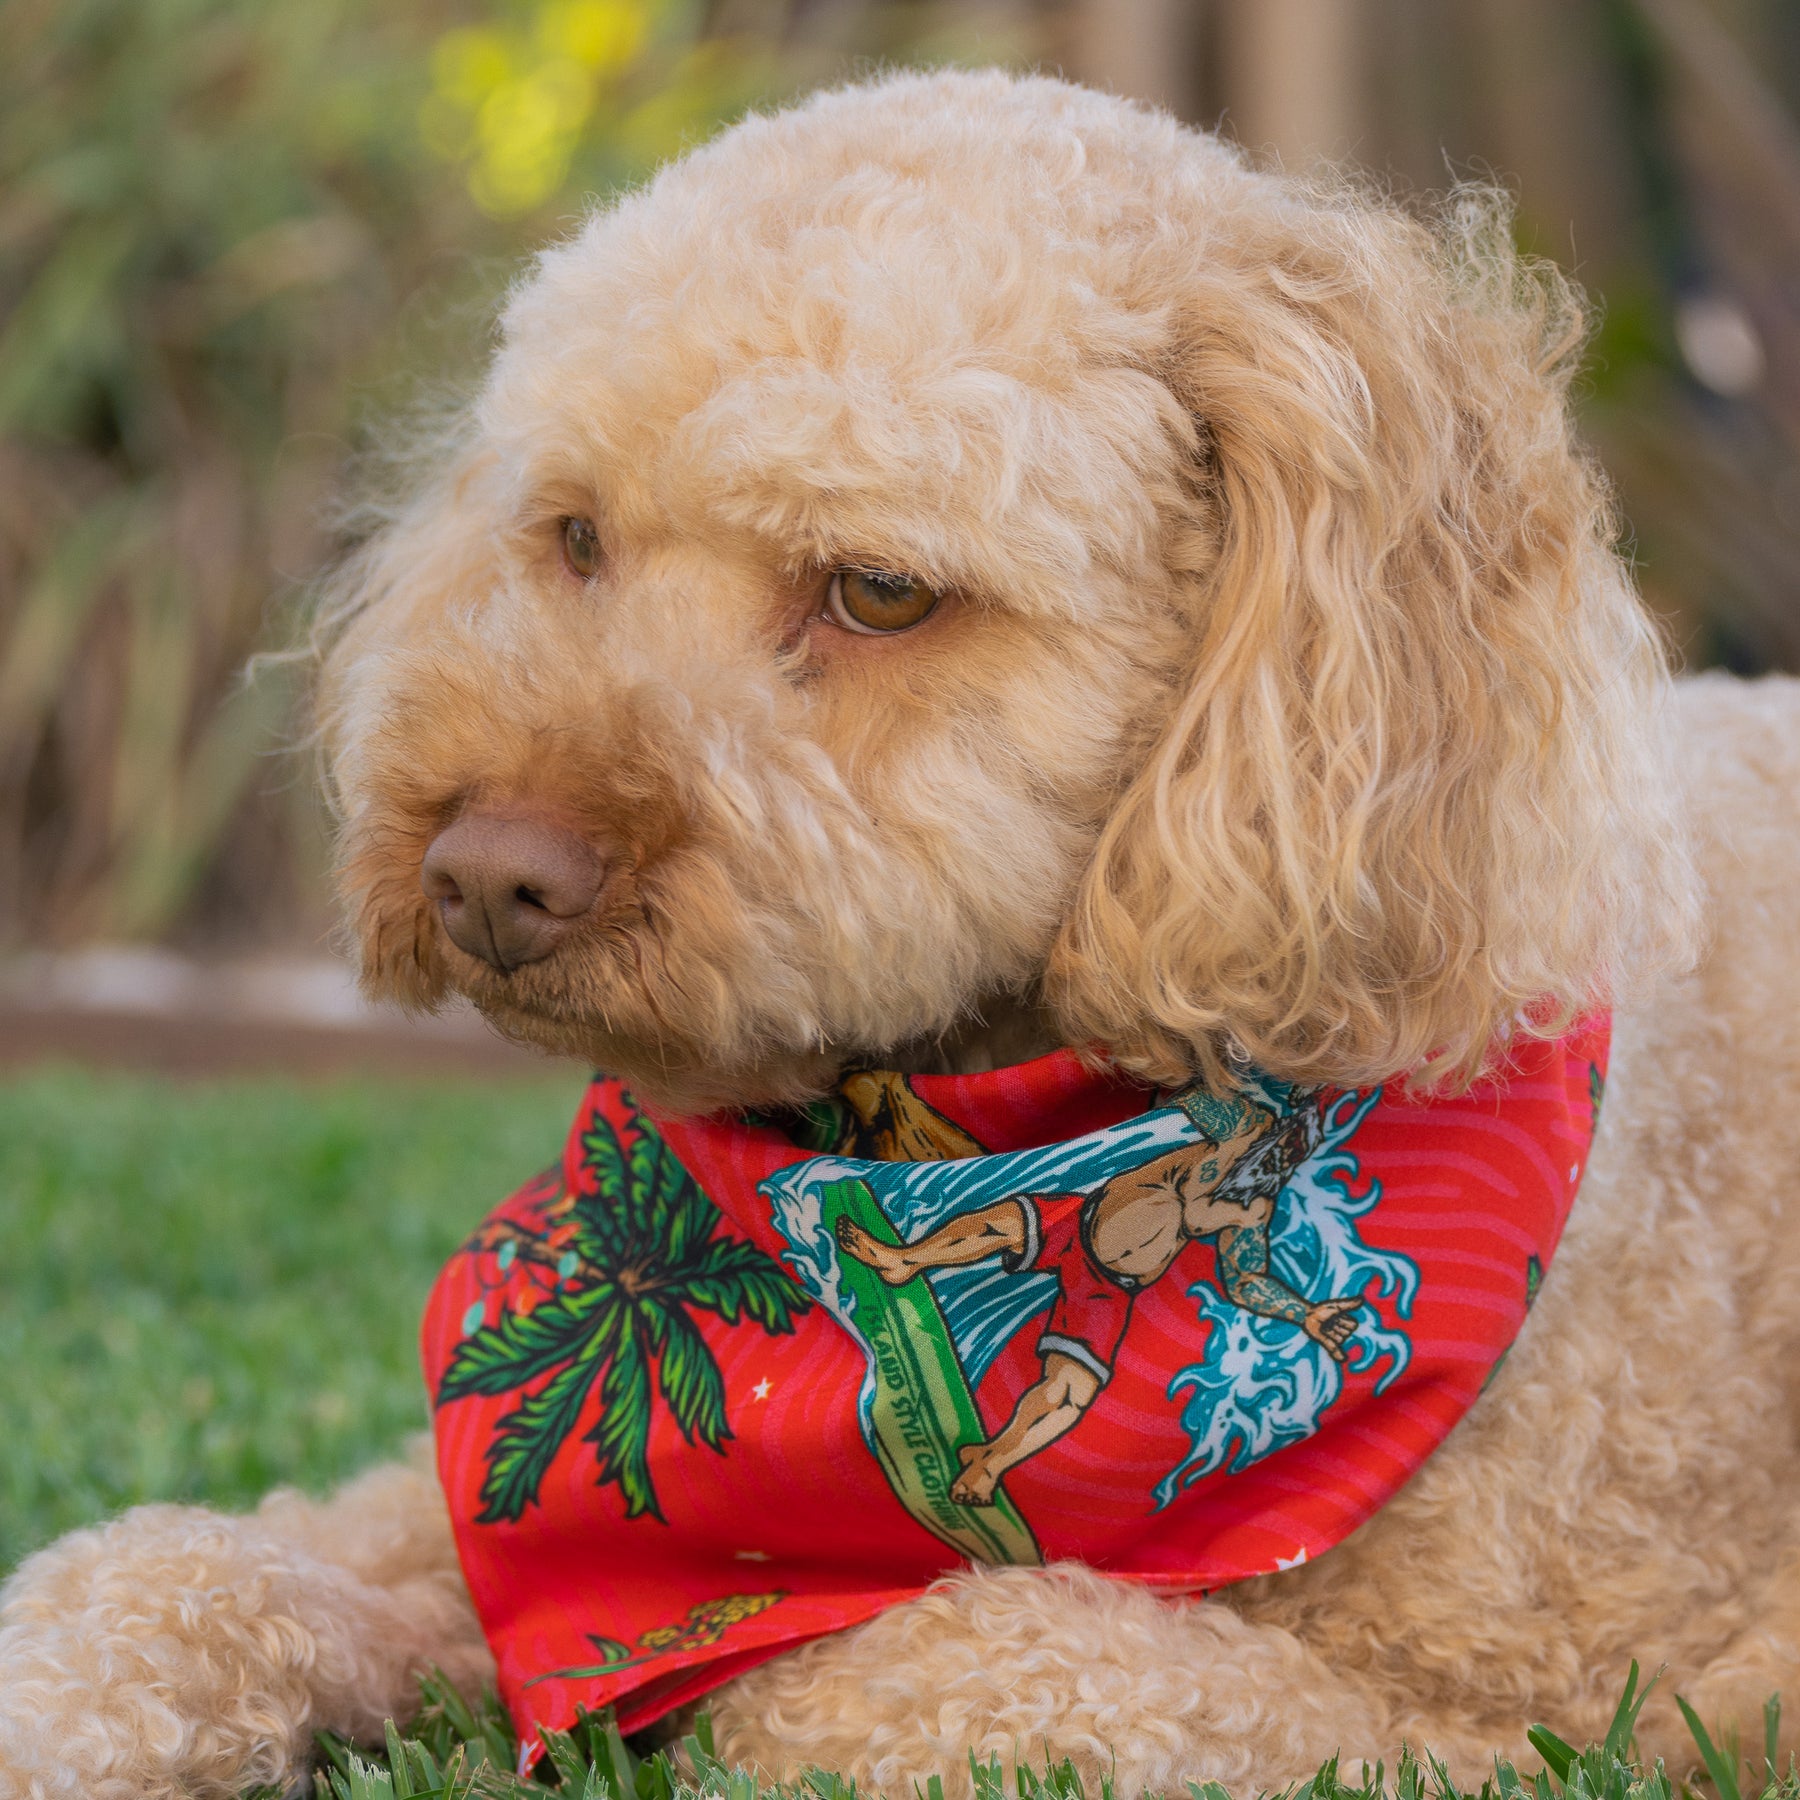 Kit for the koolest in the Kennel! Help your furry family member be the Santa of attention this Christmas with our newest Aussie Christmas Dog Bandana. Sure to earn some jealous looks on the streets, this bandana comes in two different sizes to fit most breeds.